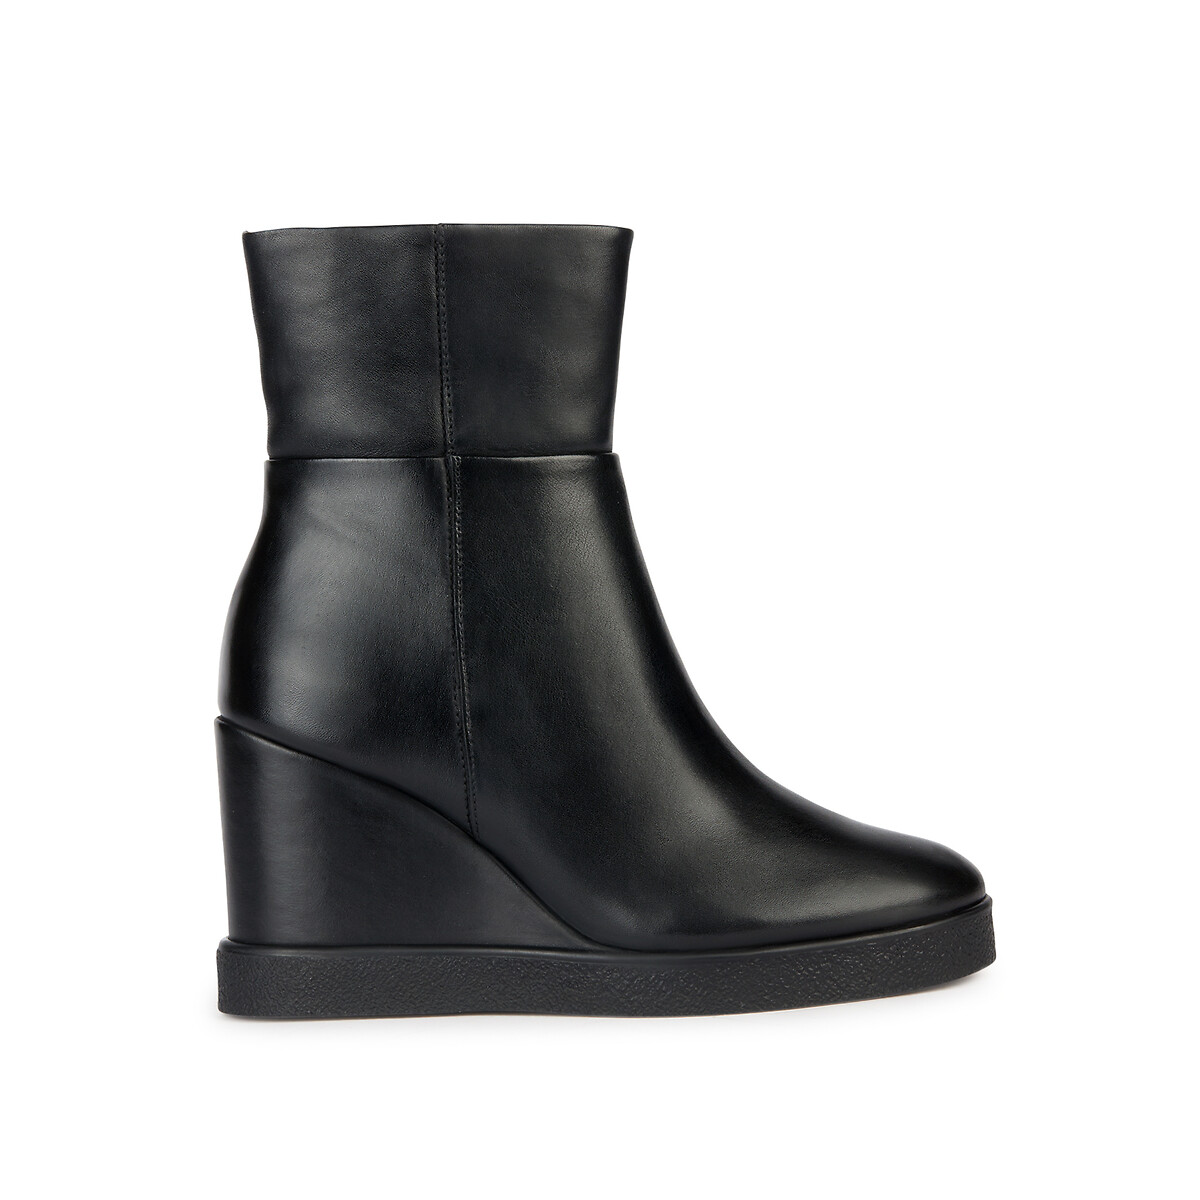 Elidea Ankle Boots in Breathable Leather